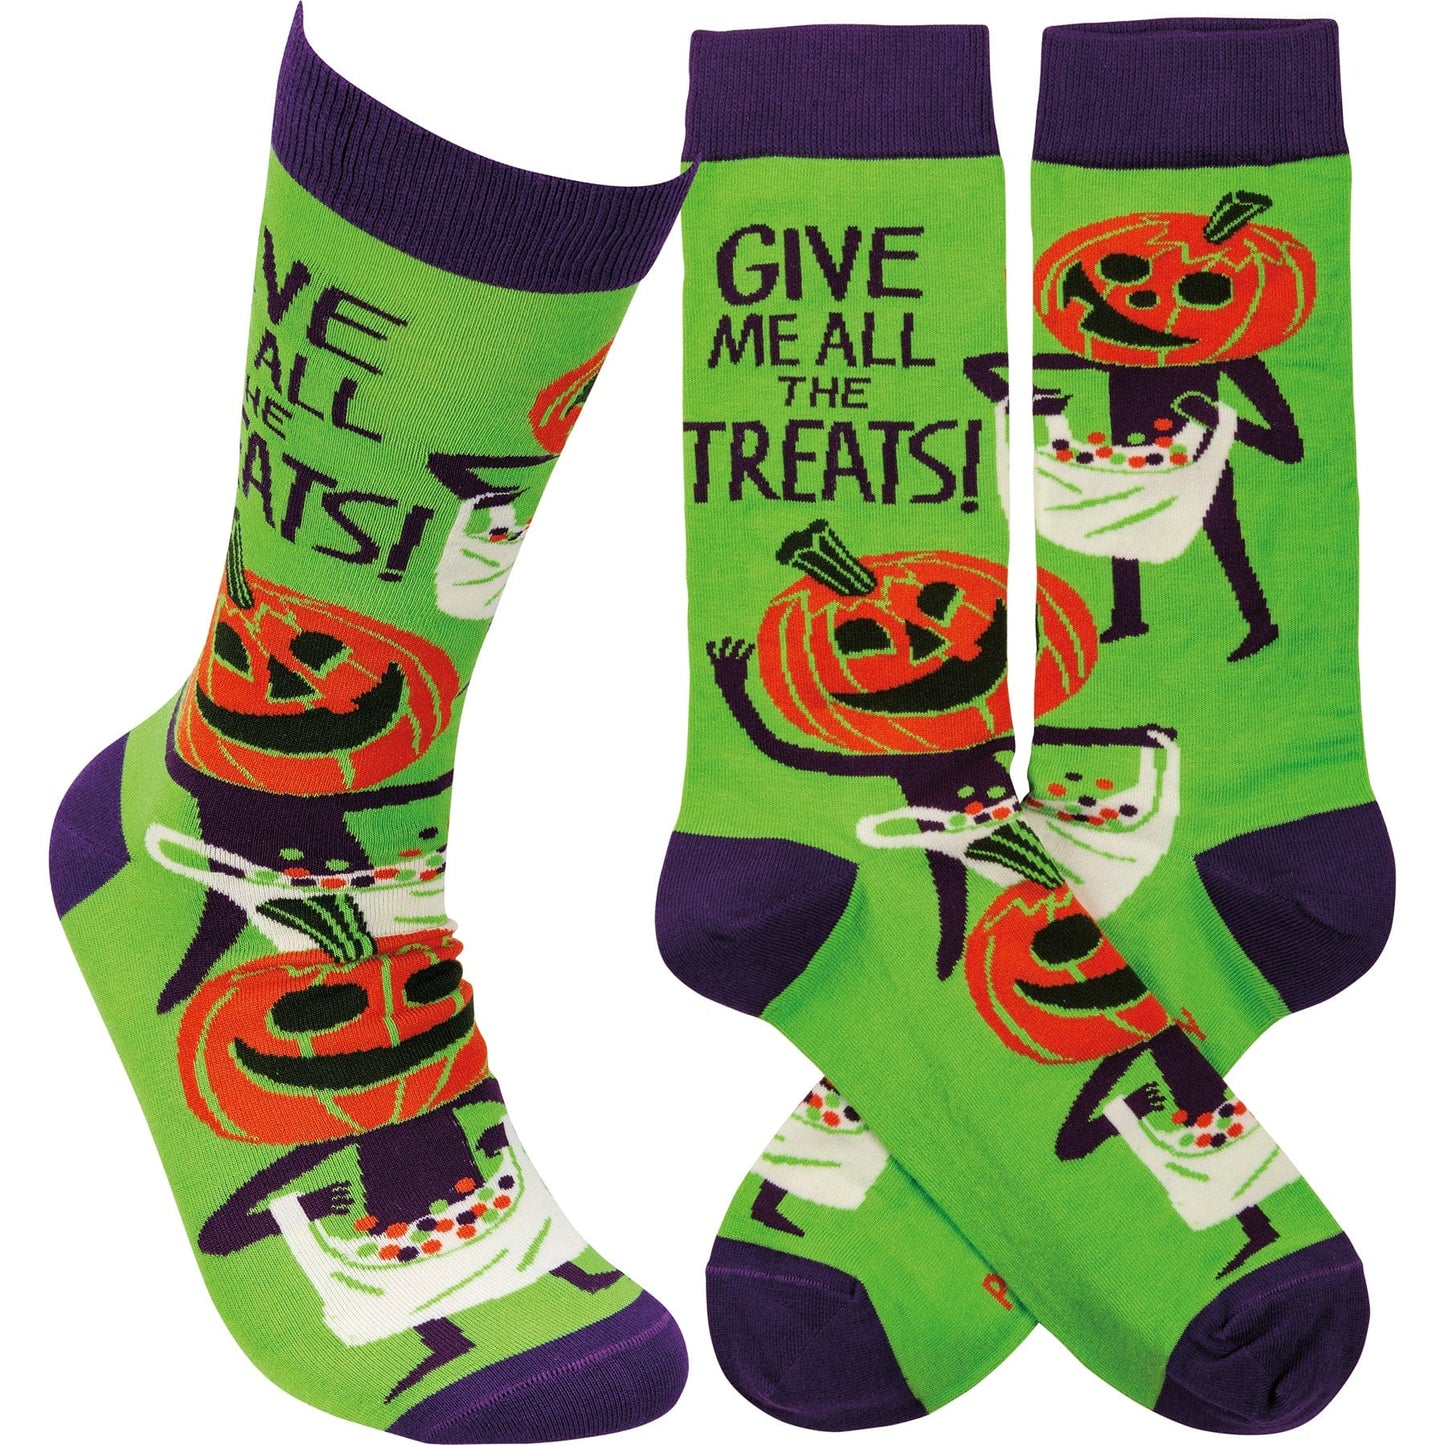 Socks One Size Fits Most Socks - Give Me All The Treats PBK-113510